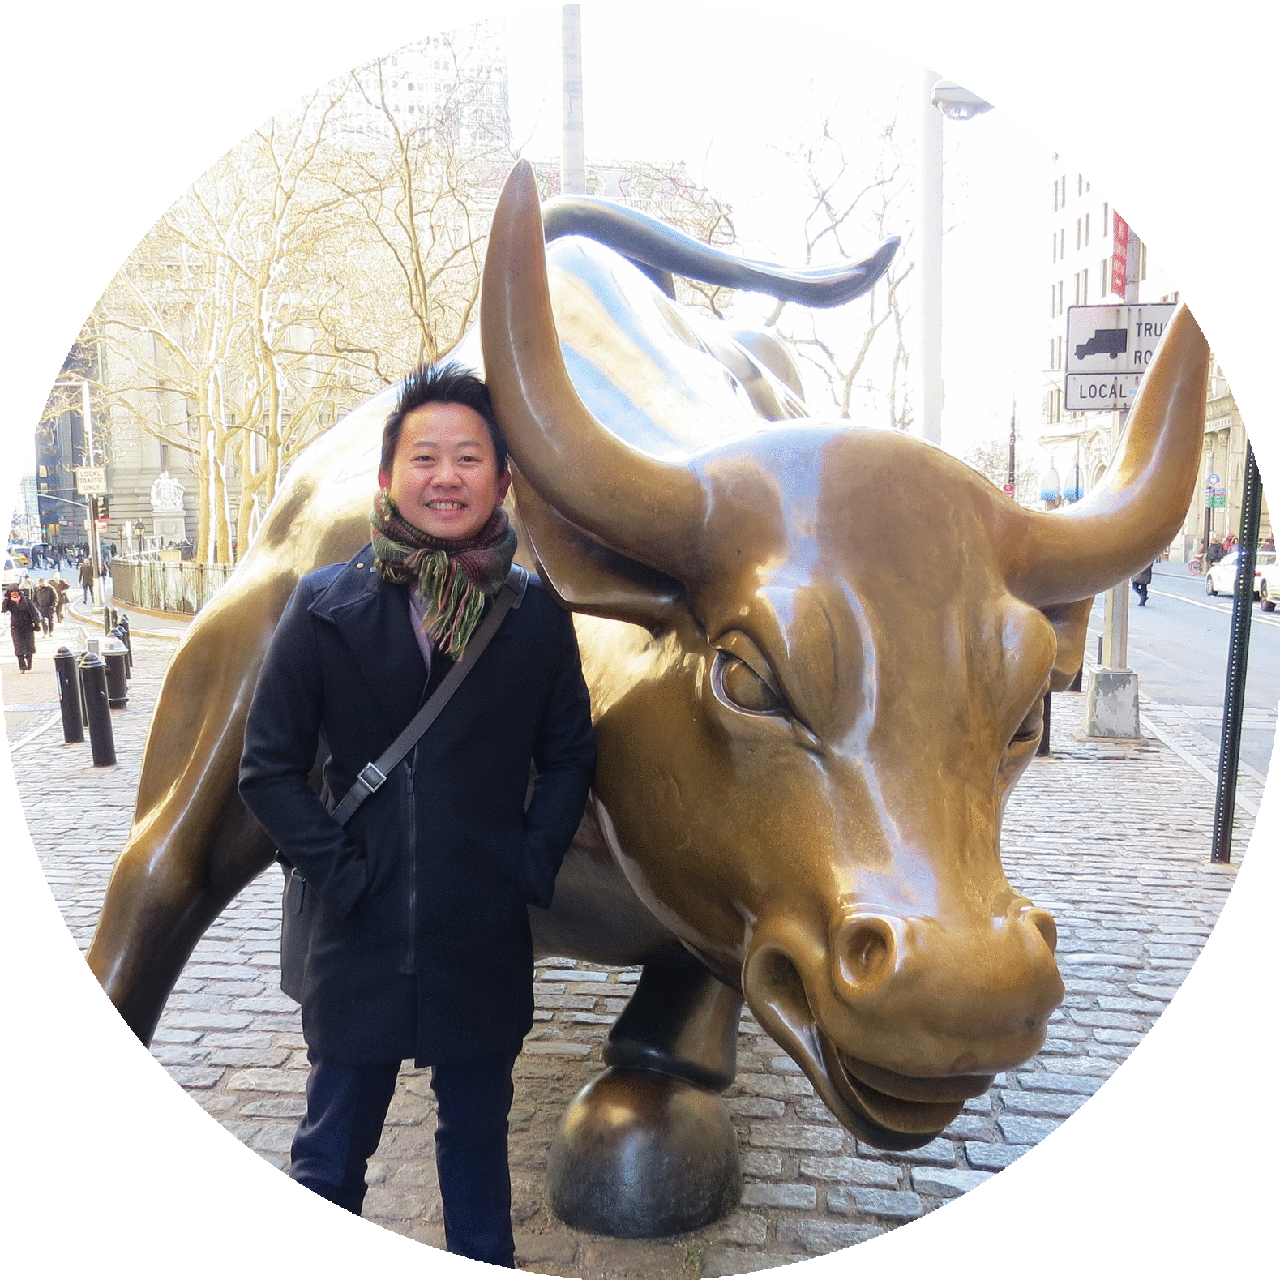 With the Wall St Bull